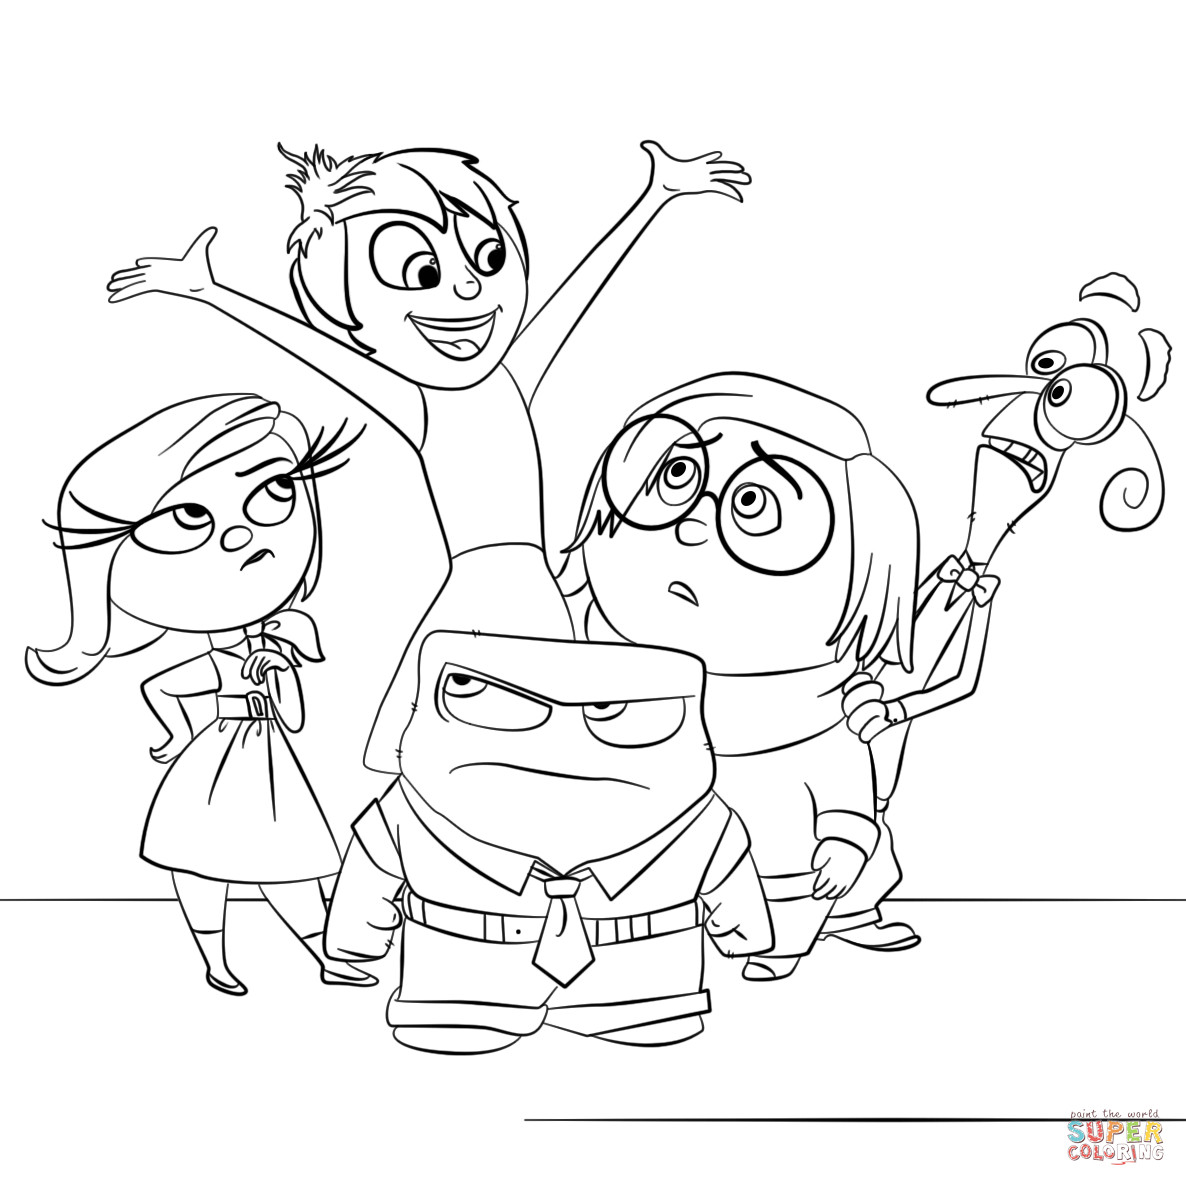 Inside Out Coloring Pages at GetDrawings Free download